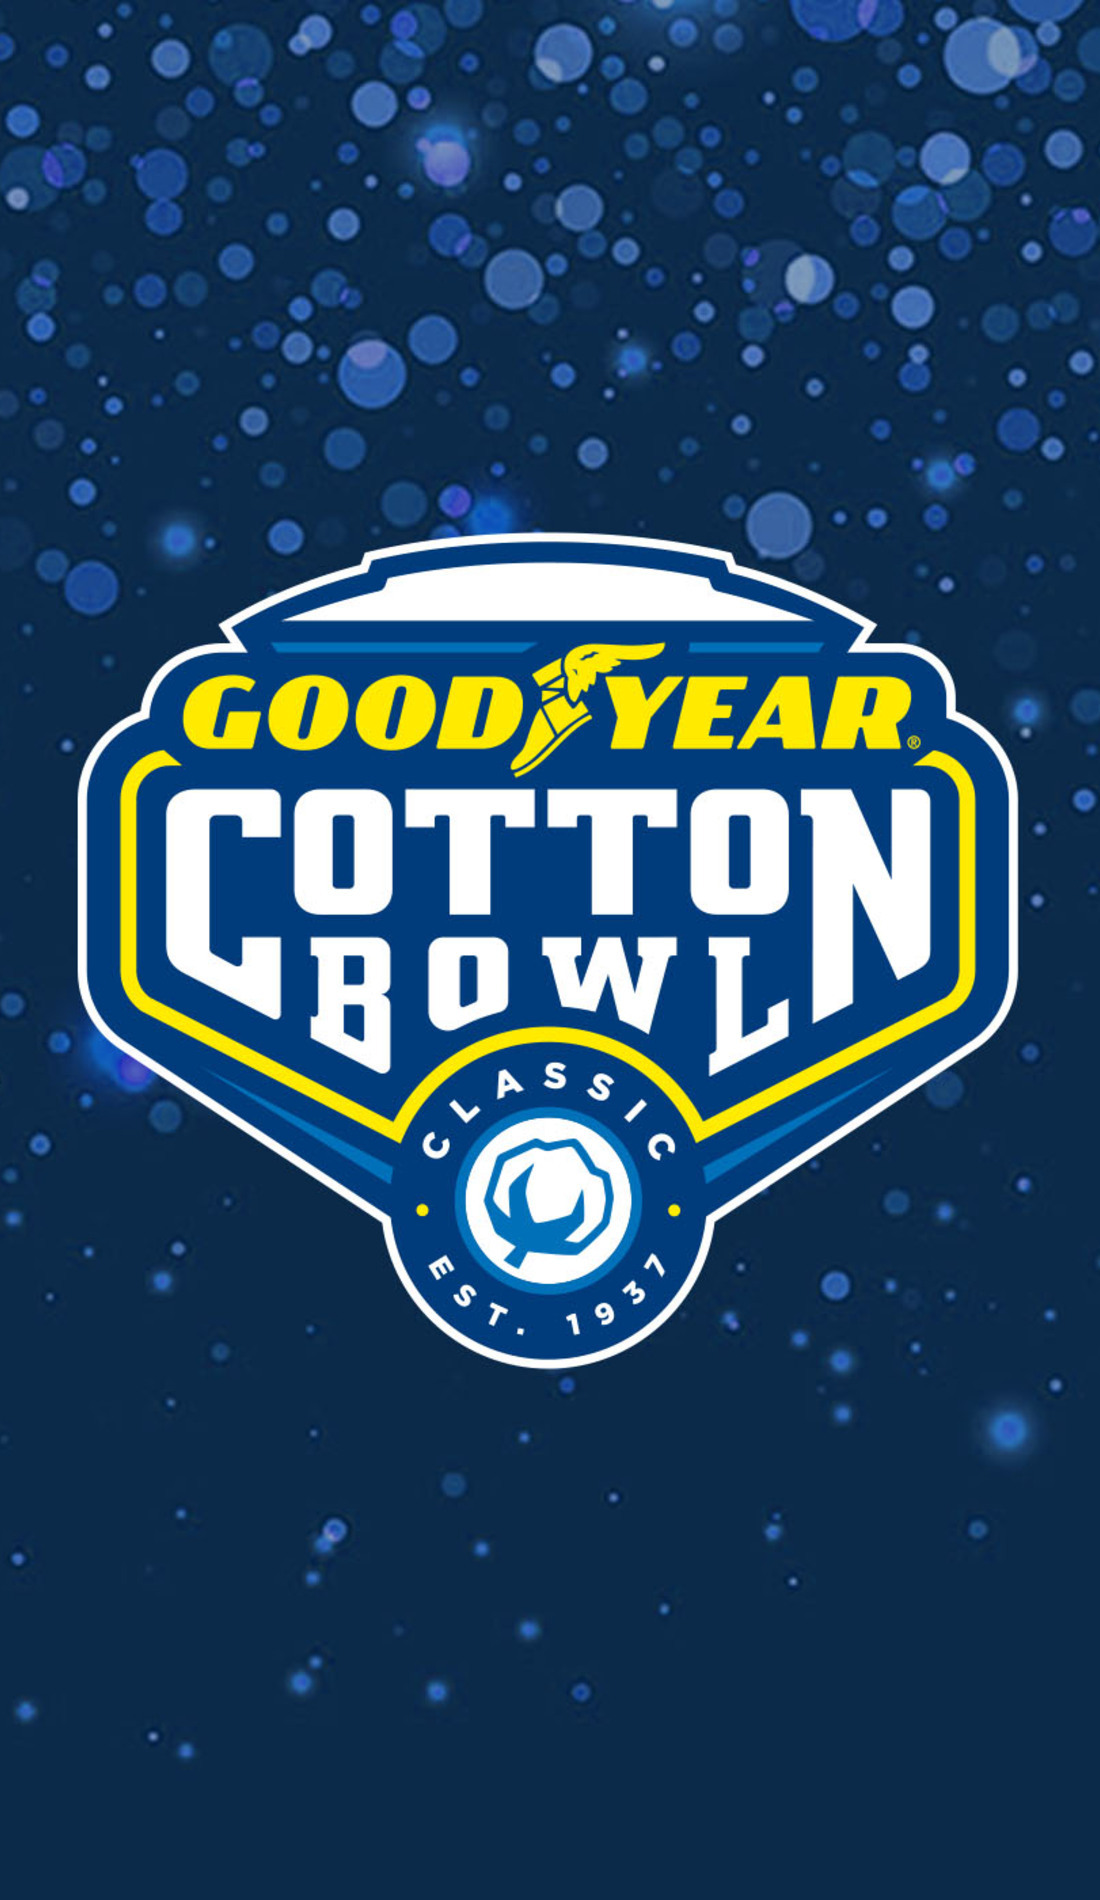 A Goodyear Cotton Bowl Classic live event